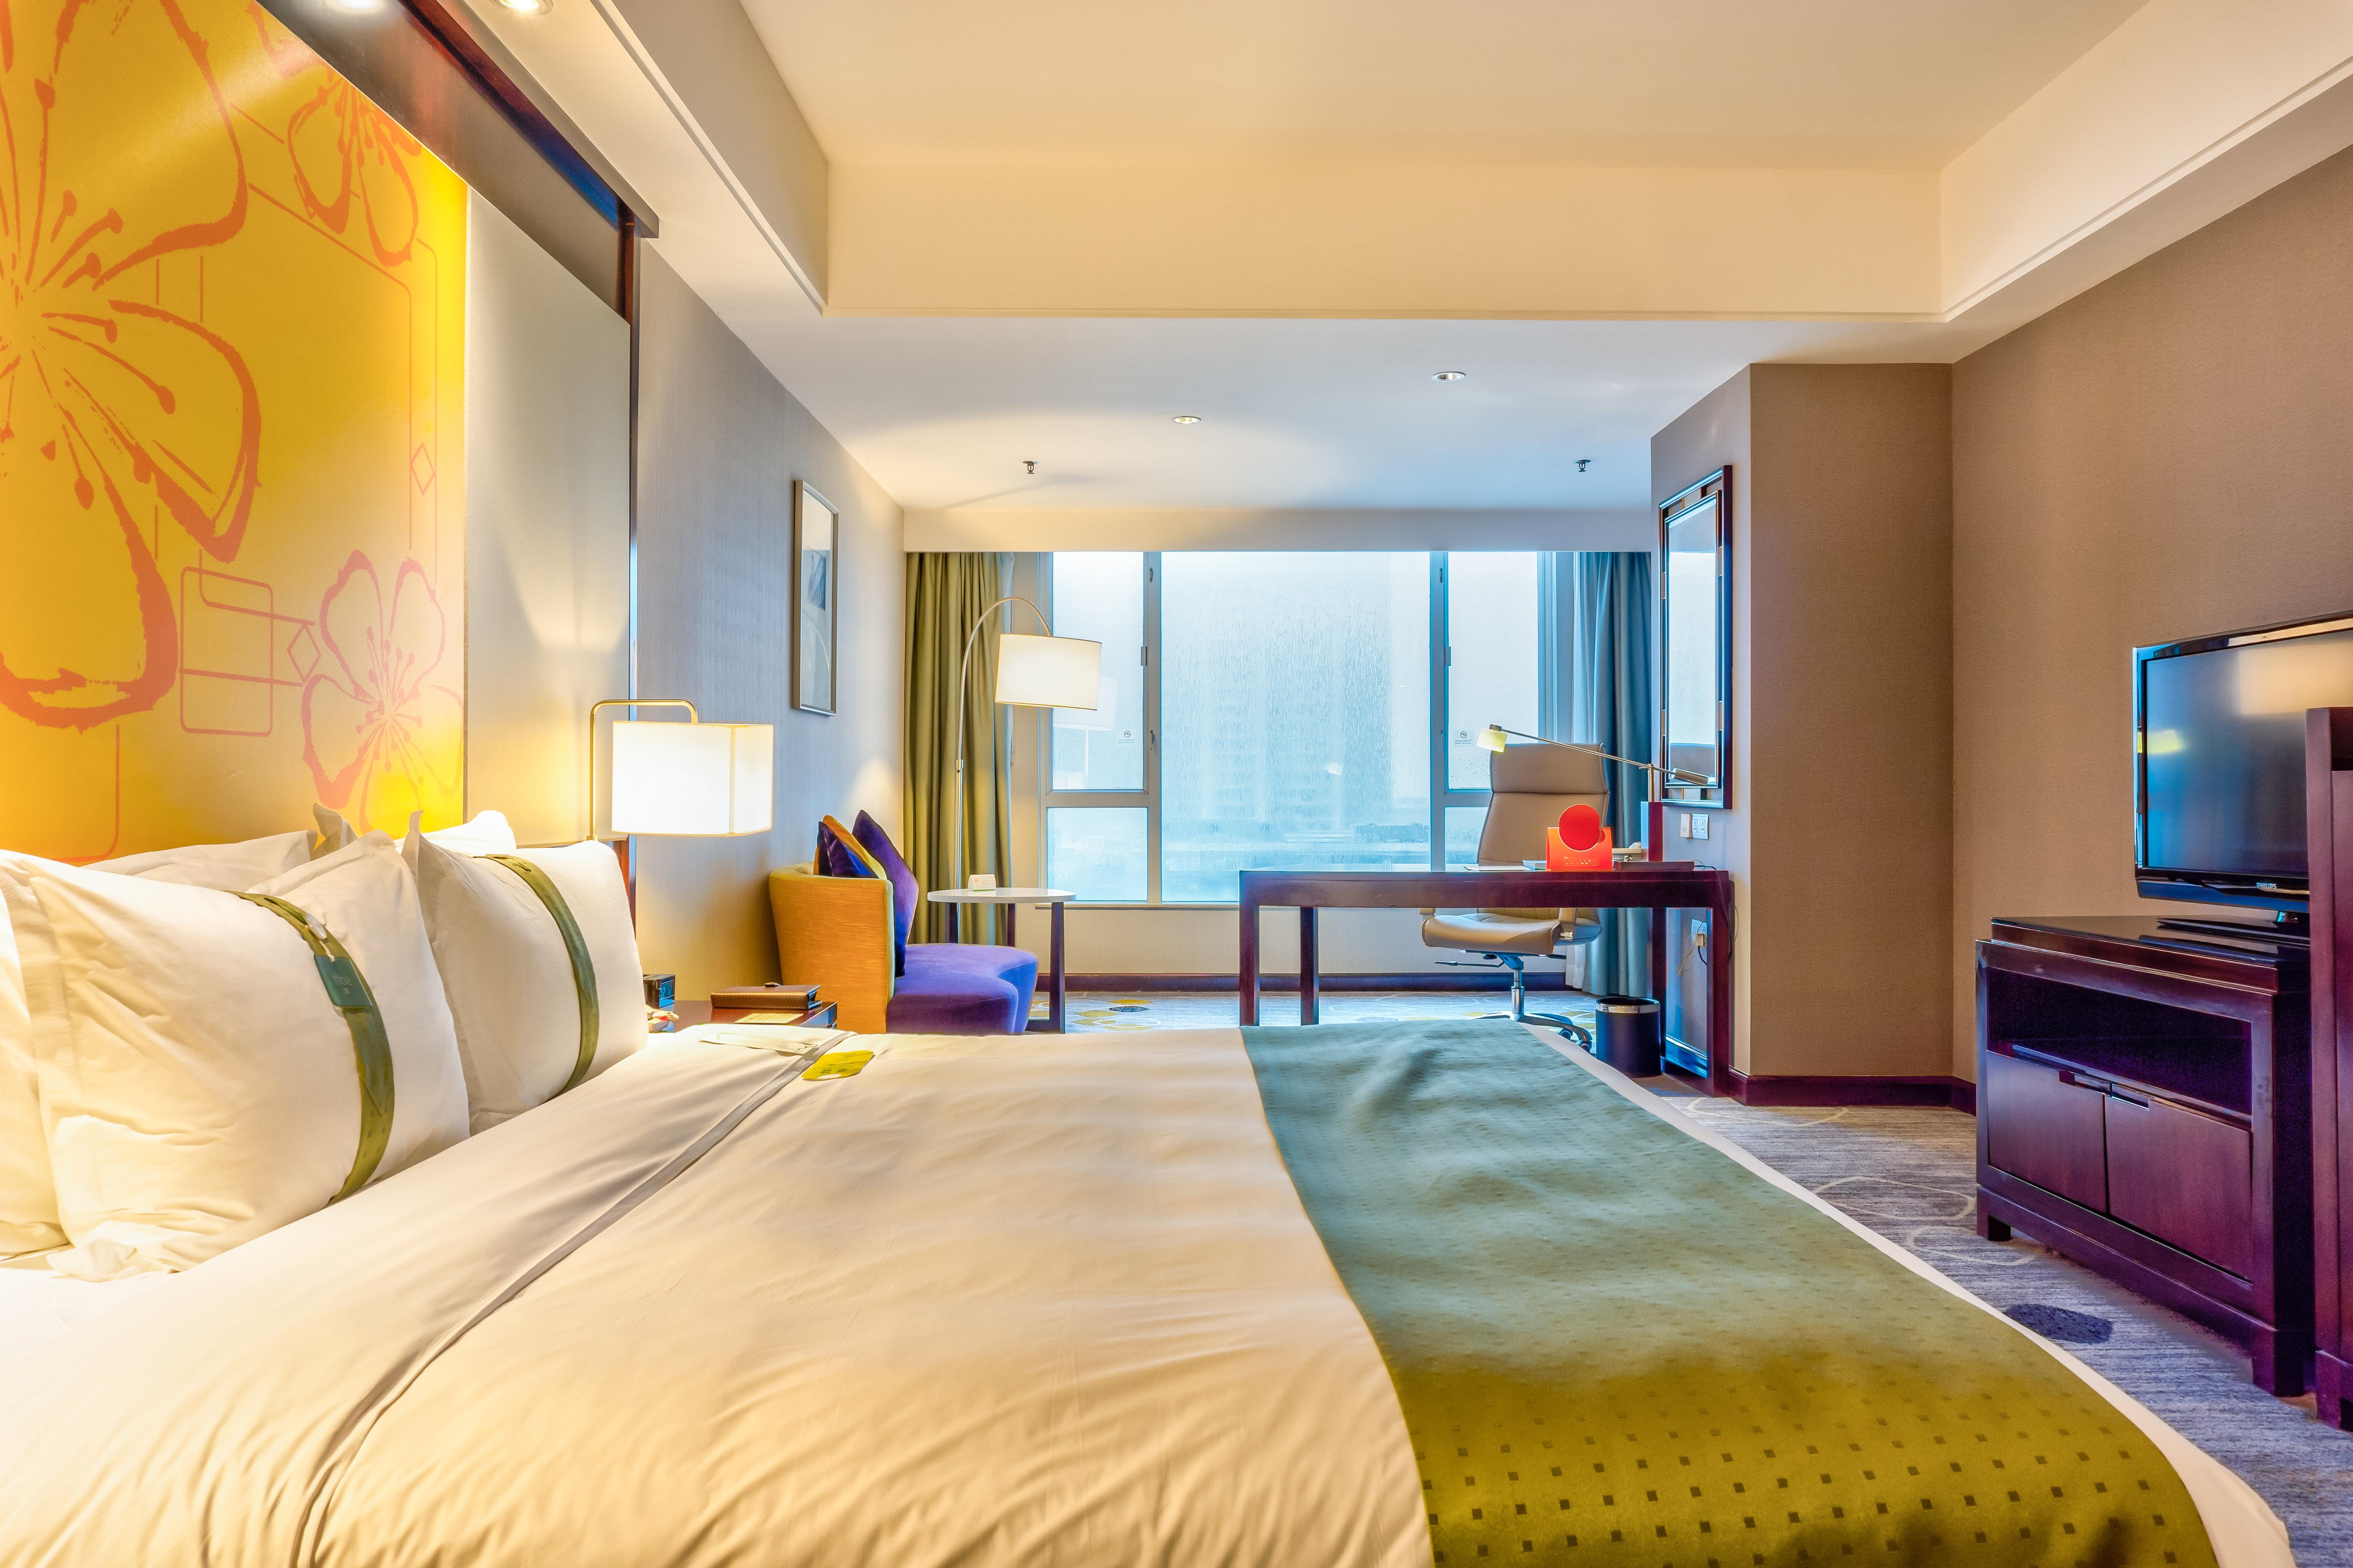 Voco Guangzhou Shifu, An Ihg Hotel - Free Shuttle Between Hotel And Exhibition Center During Canton Fair & Exhibitor Registration Counter Exterior foto